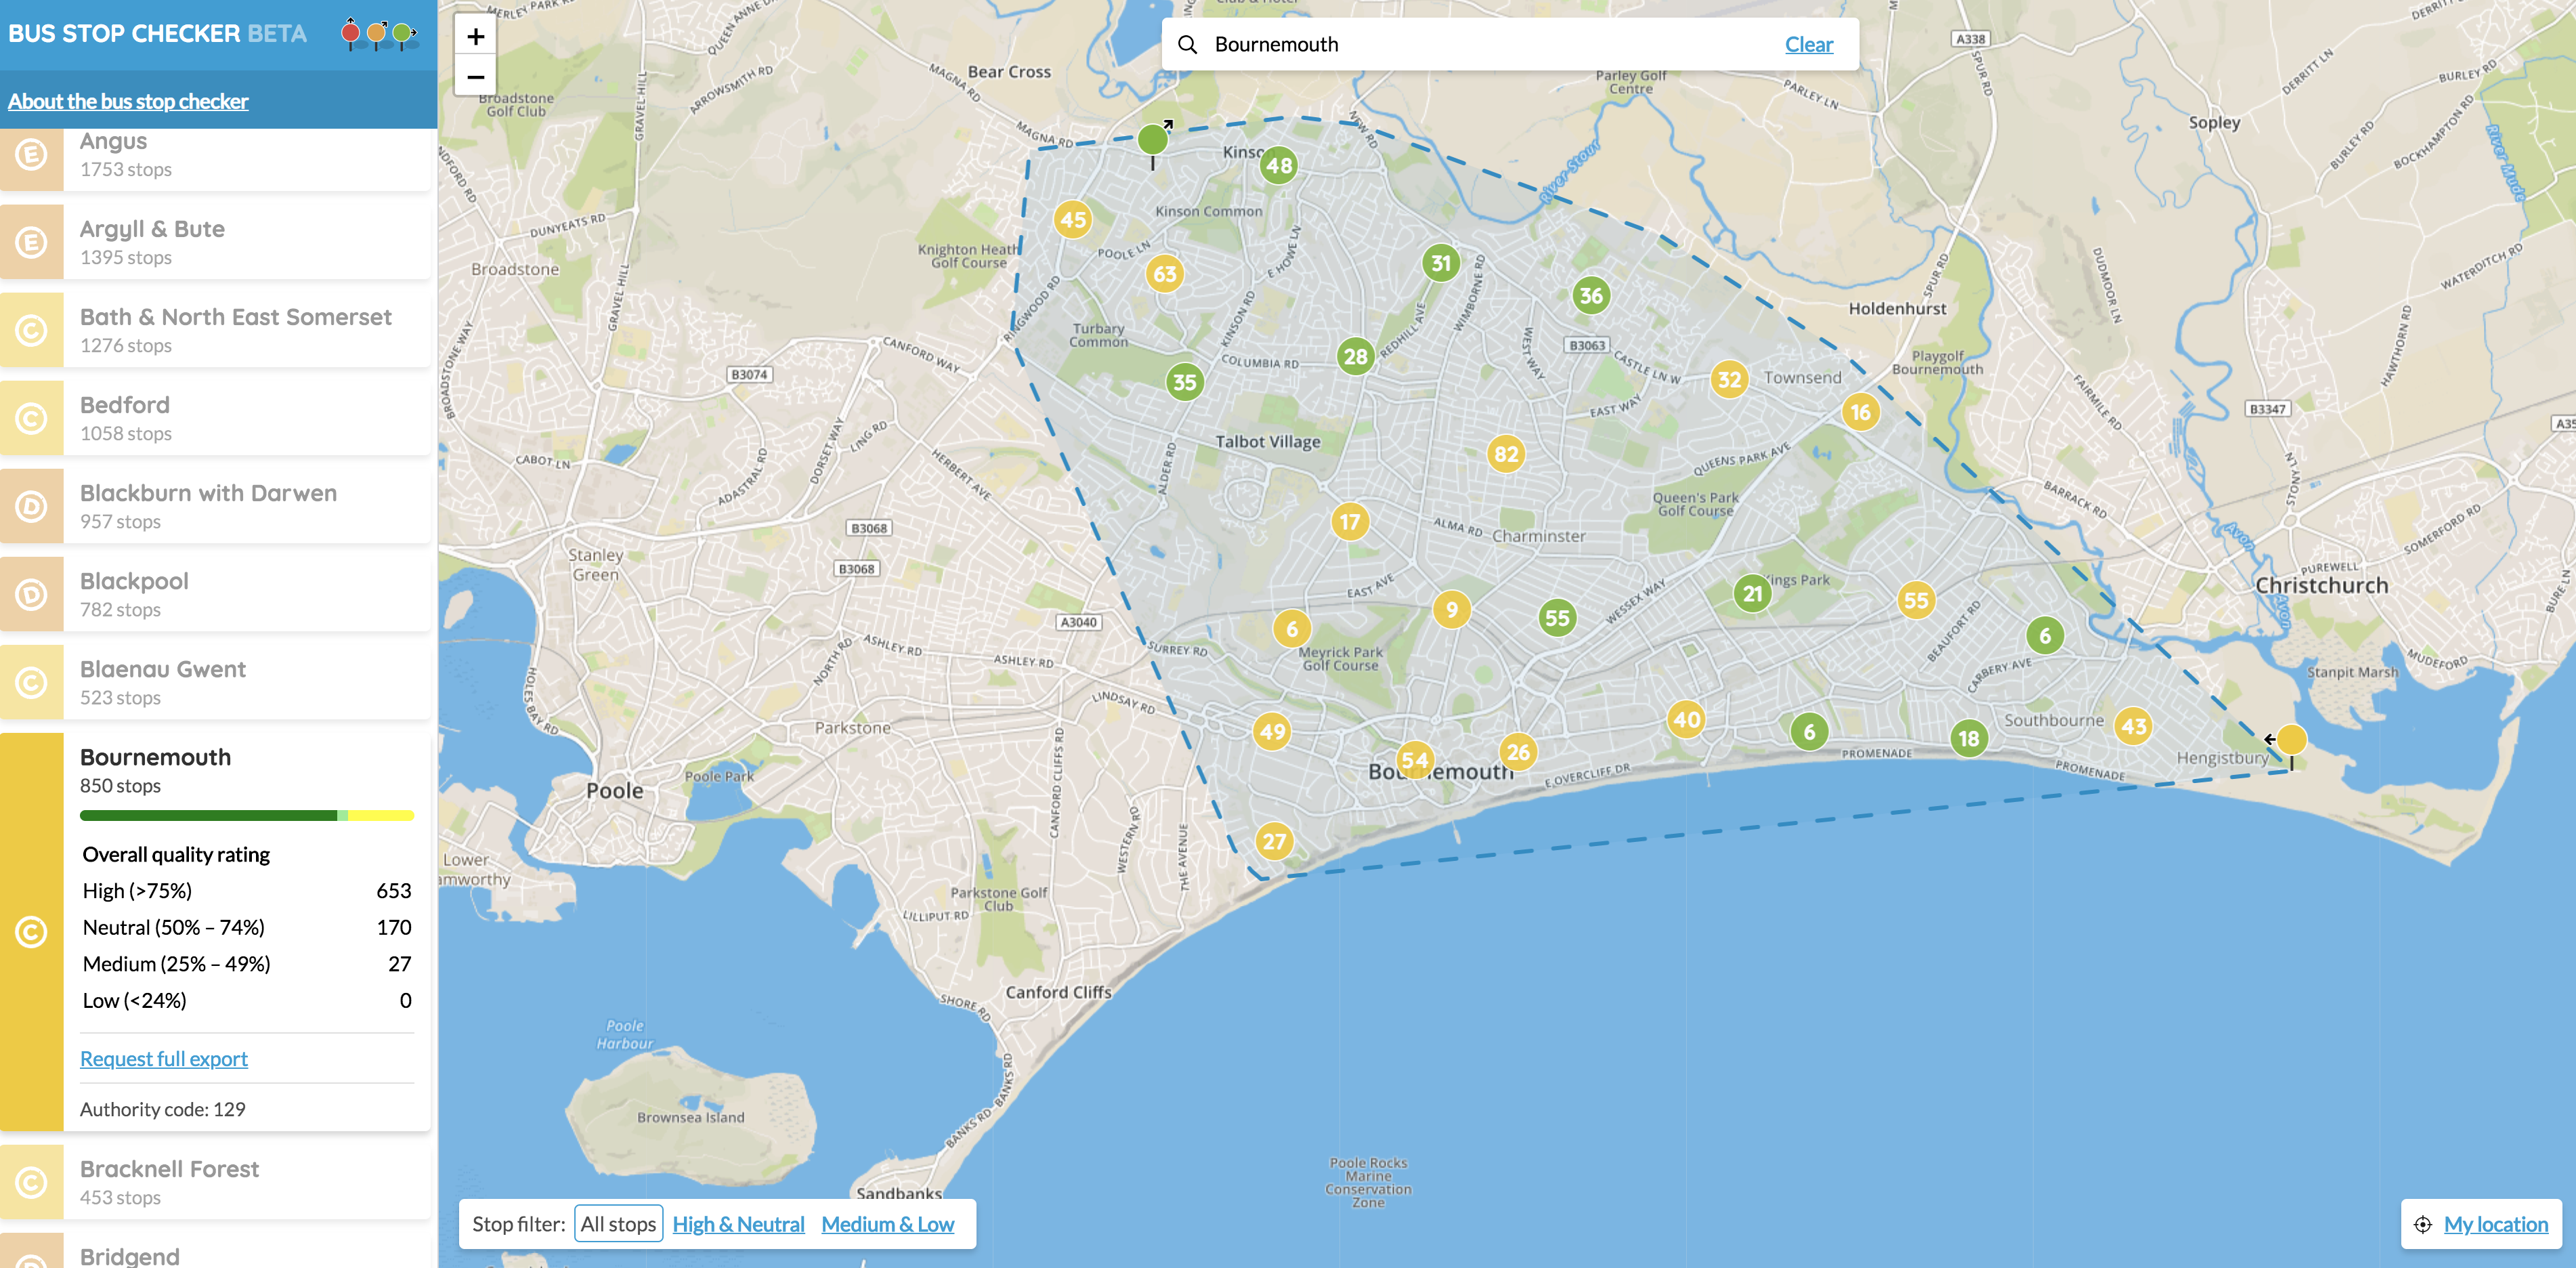 Introducing Bus Stop Checker – an initiative to improve open data in public transport